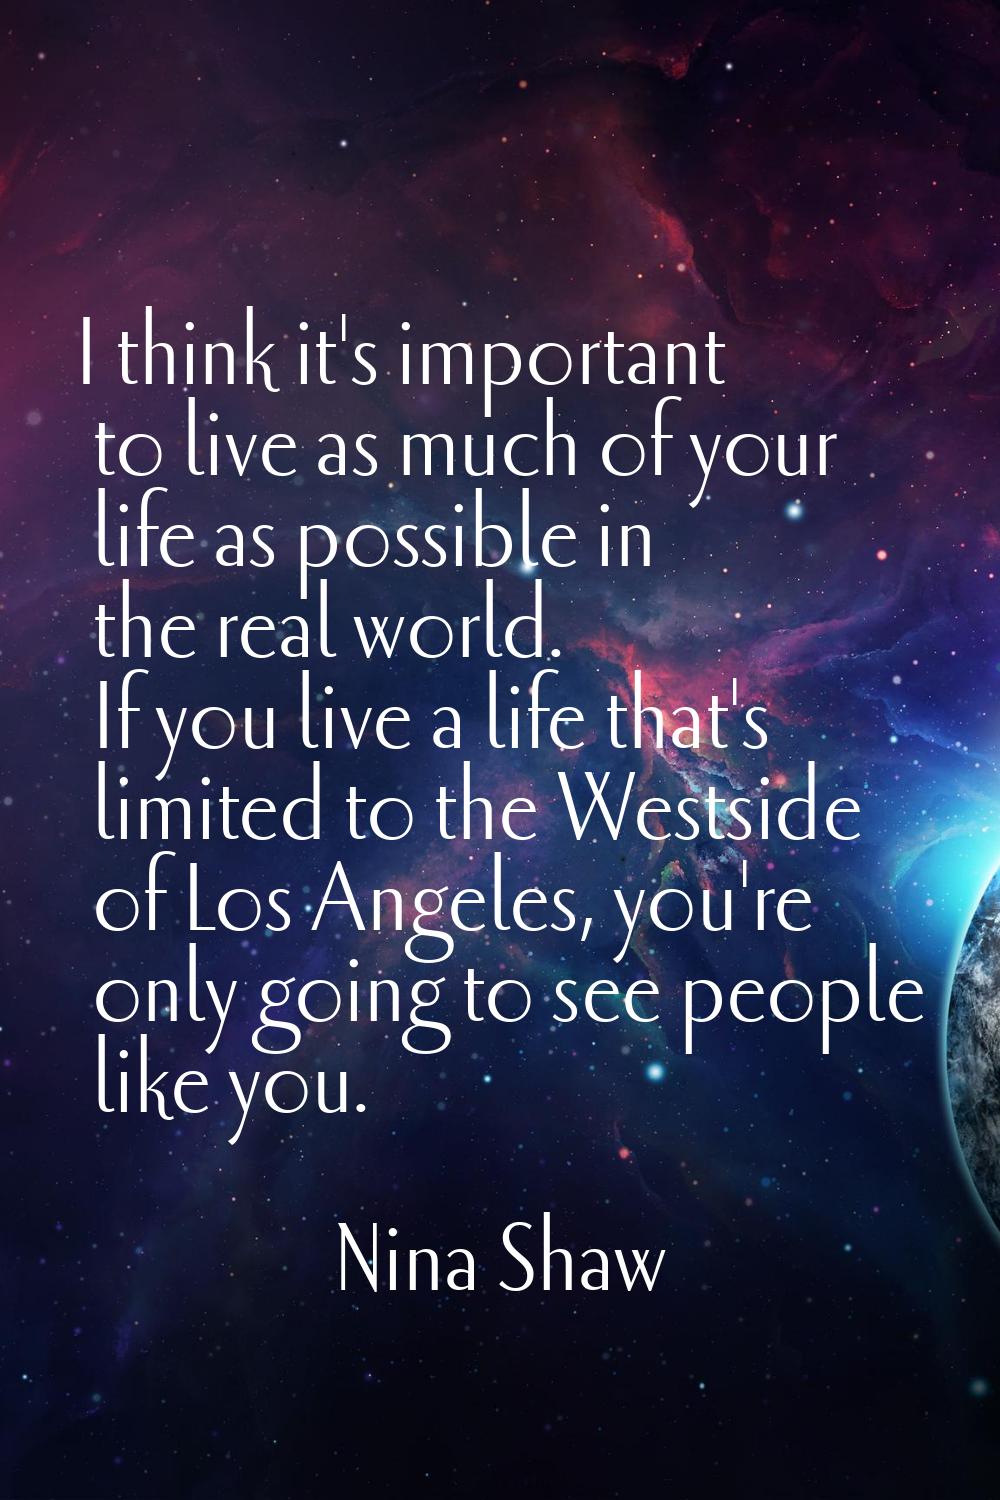 I think it's important to live as much of your life as possible in the real world. If you live a li